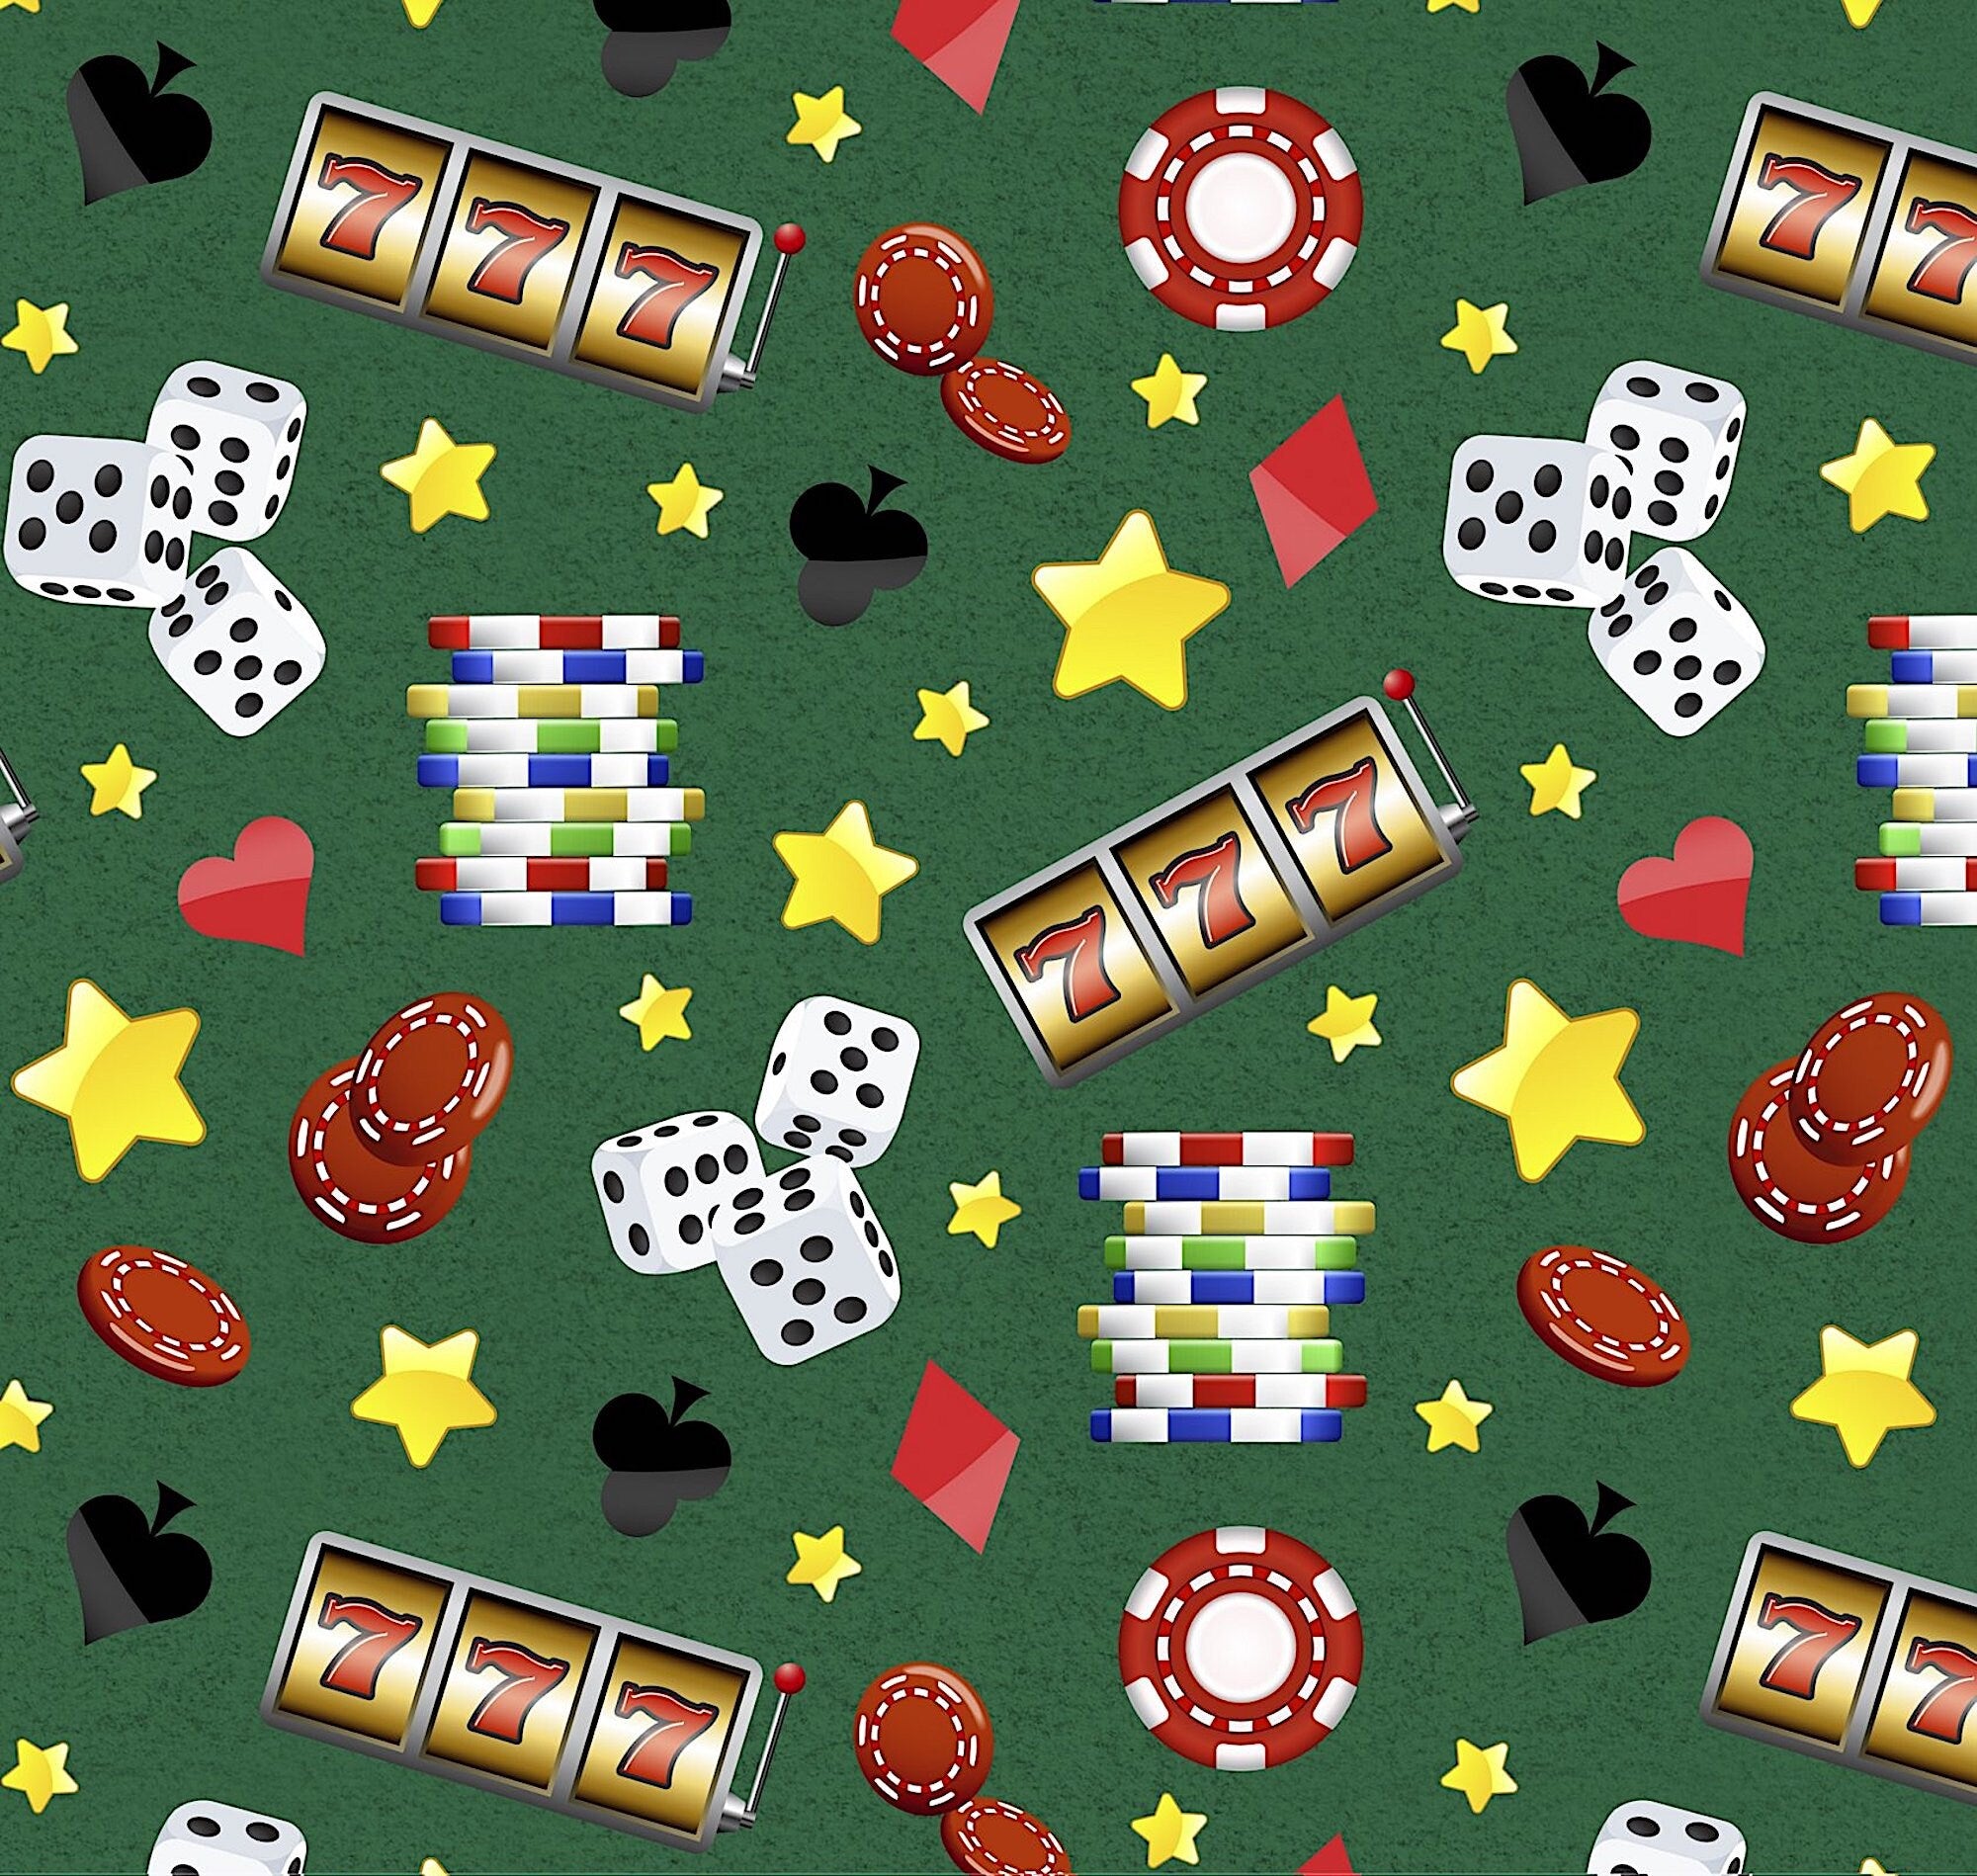 Green cotton fabric covered with casino items such as chips, dice, hearts, stars and more.